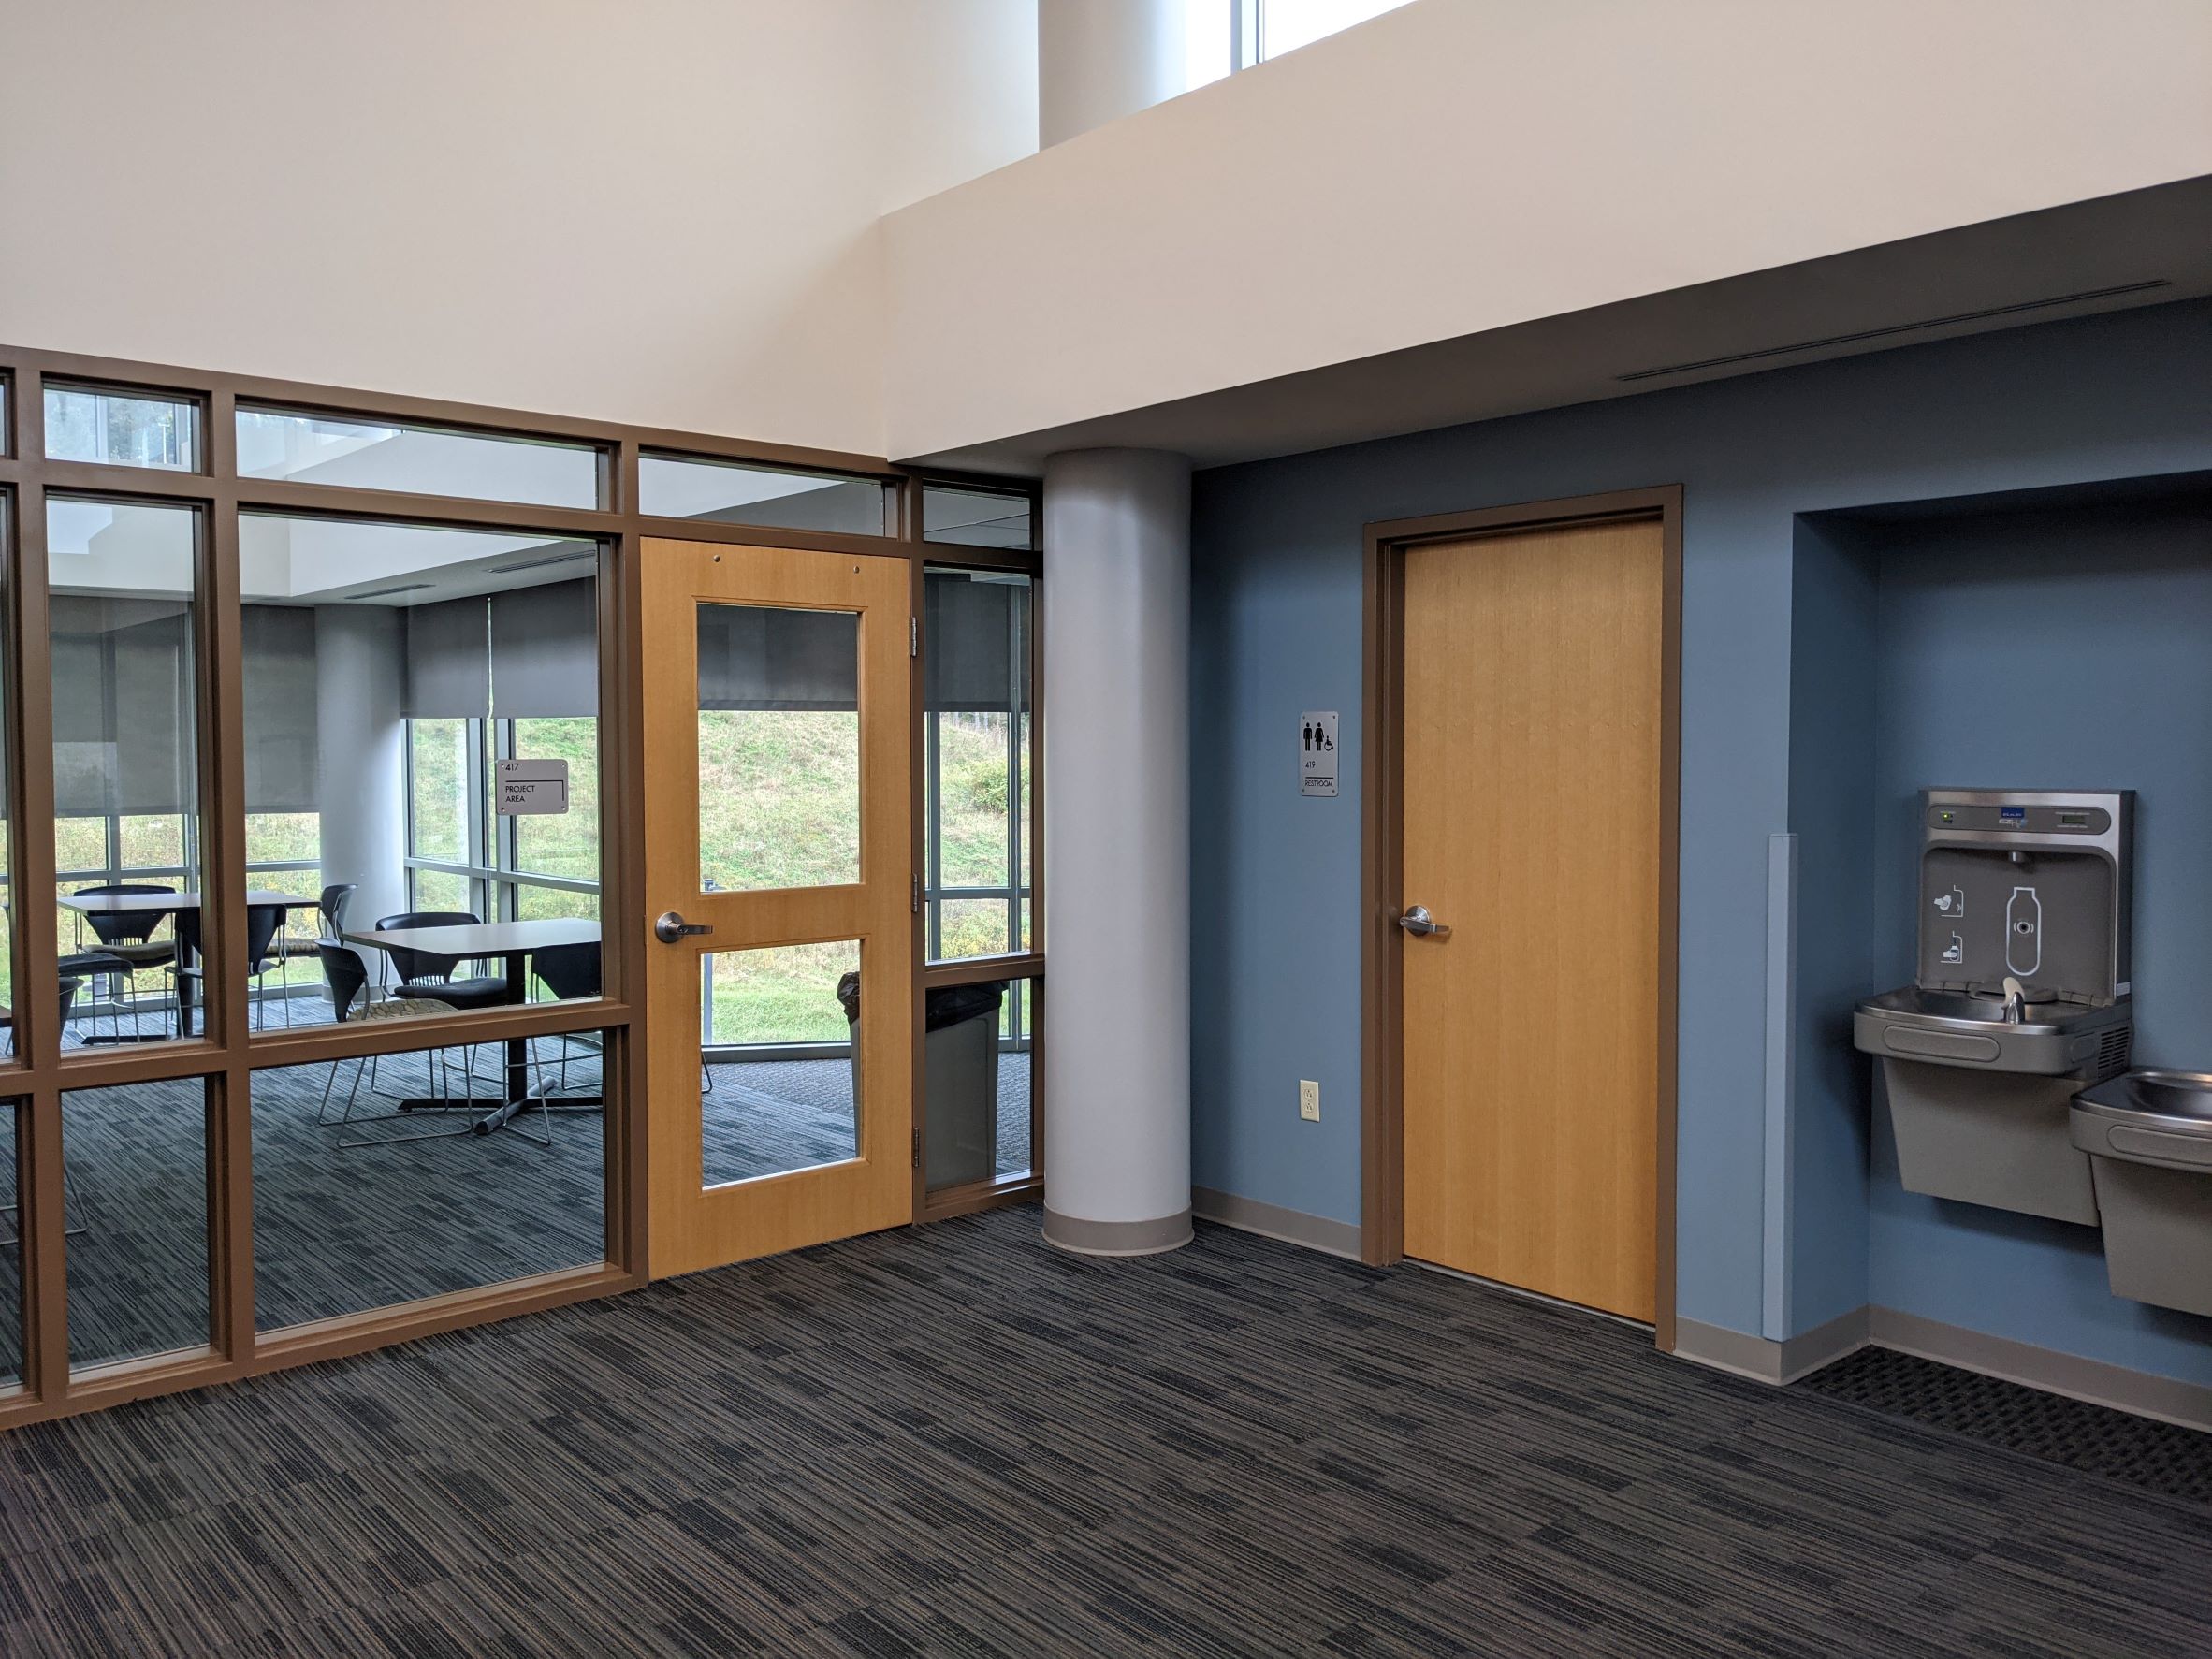 Lobby area of dormitory with cloud blue accent wall, with white bulkheads above, natural wood stained honey colored doors, and glass windows into adjacent lounge space with tables and chairs visible through windows, and wooded trees/hillside beyond, water cooler/drinking fountain with modern paint swatch  looking carpet in foreground